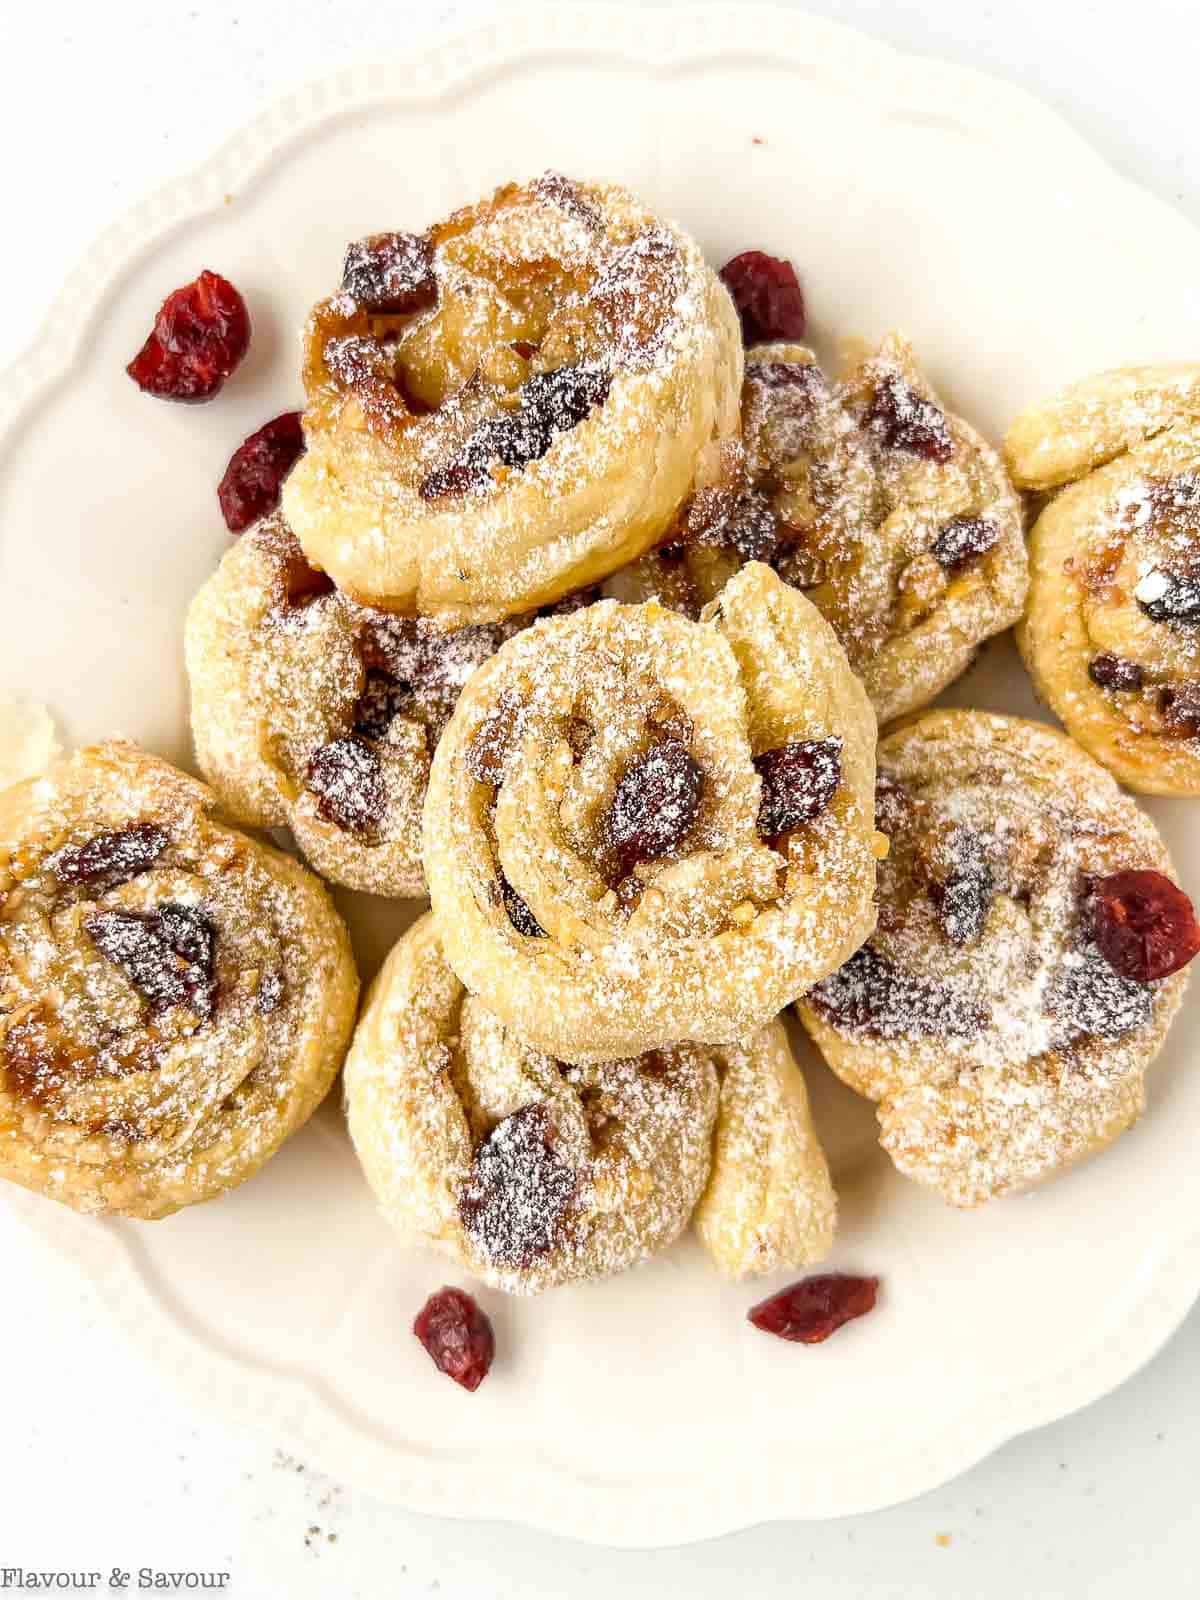 Puff pastry cranberry brie pinwheels on a serving plate.
